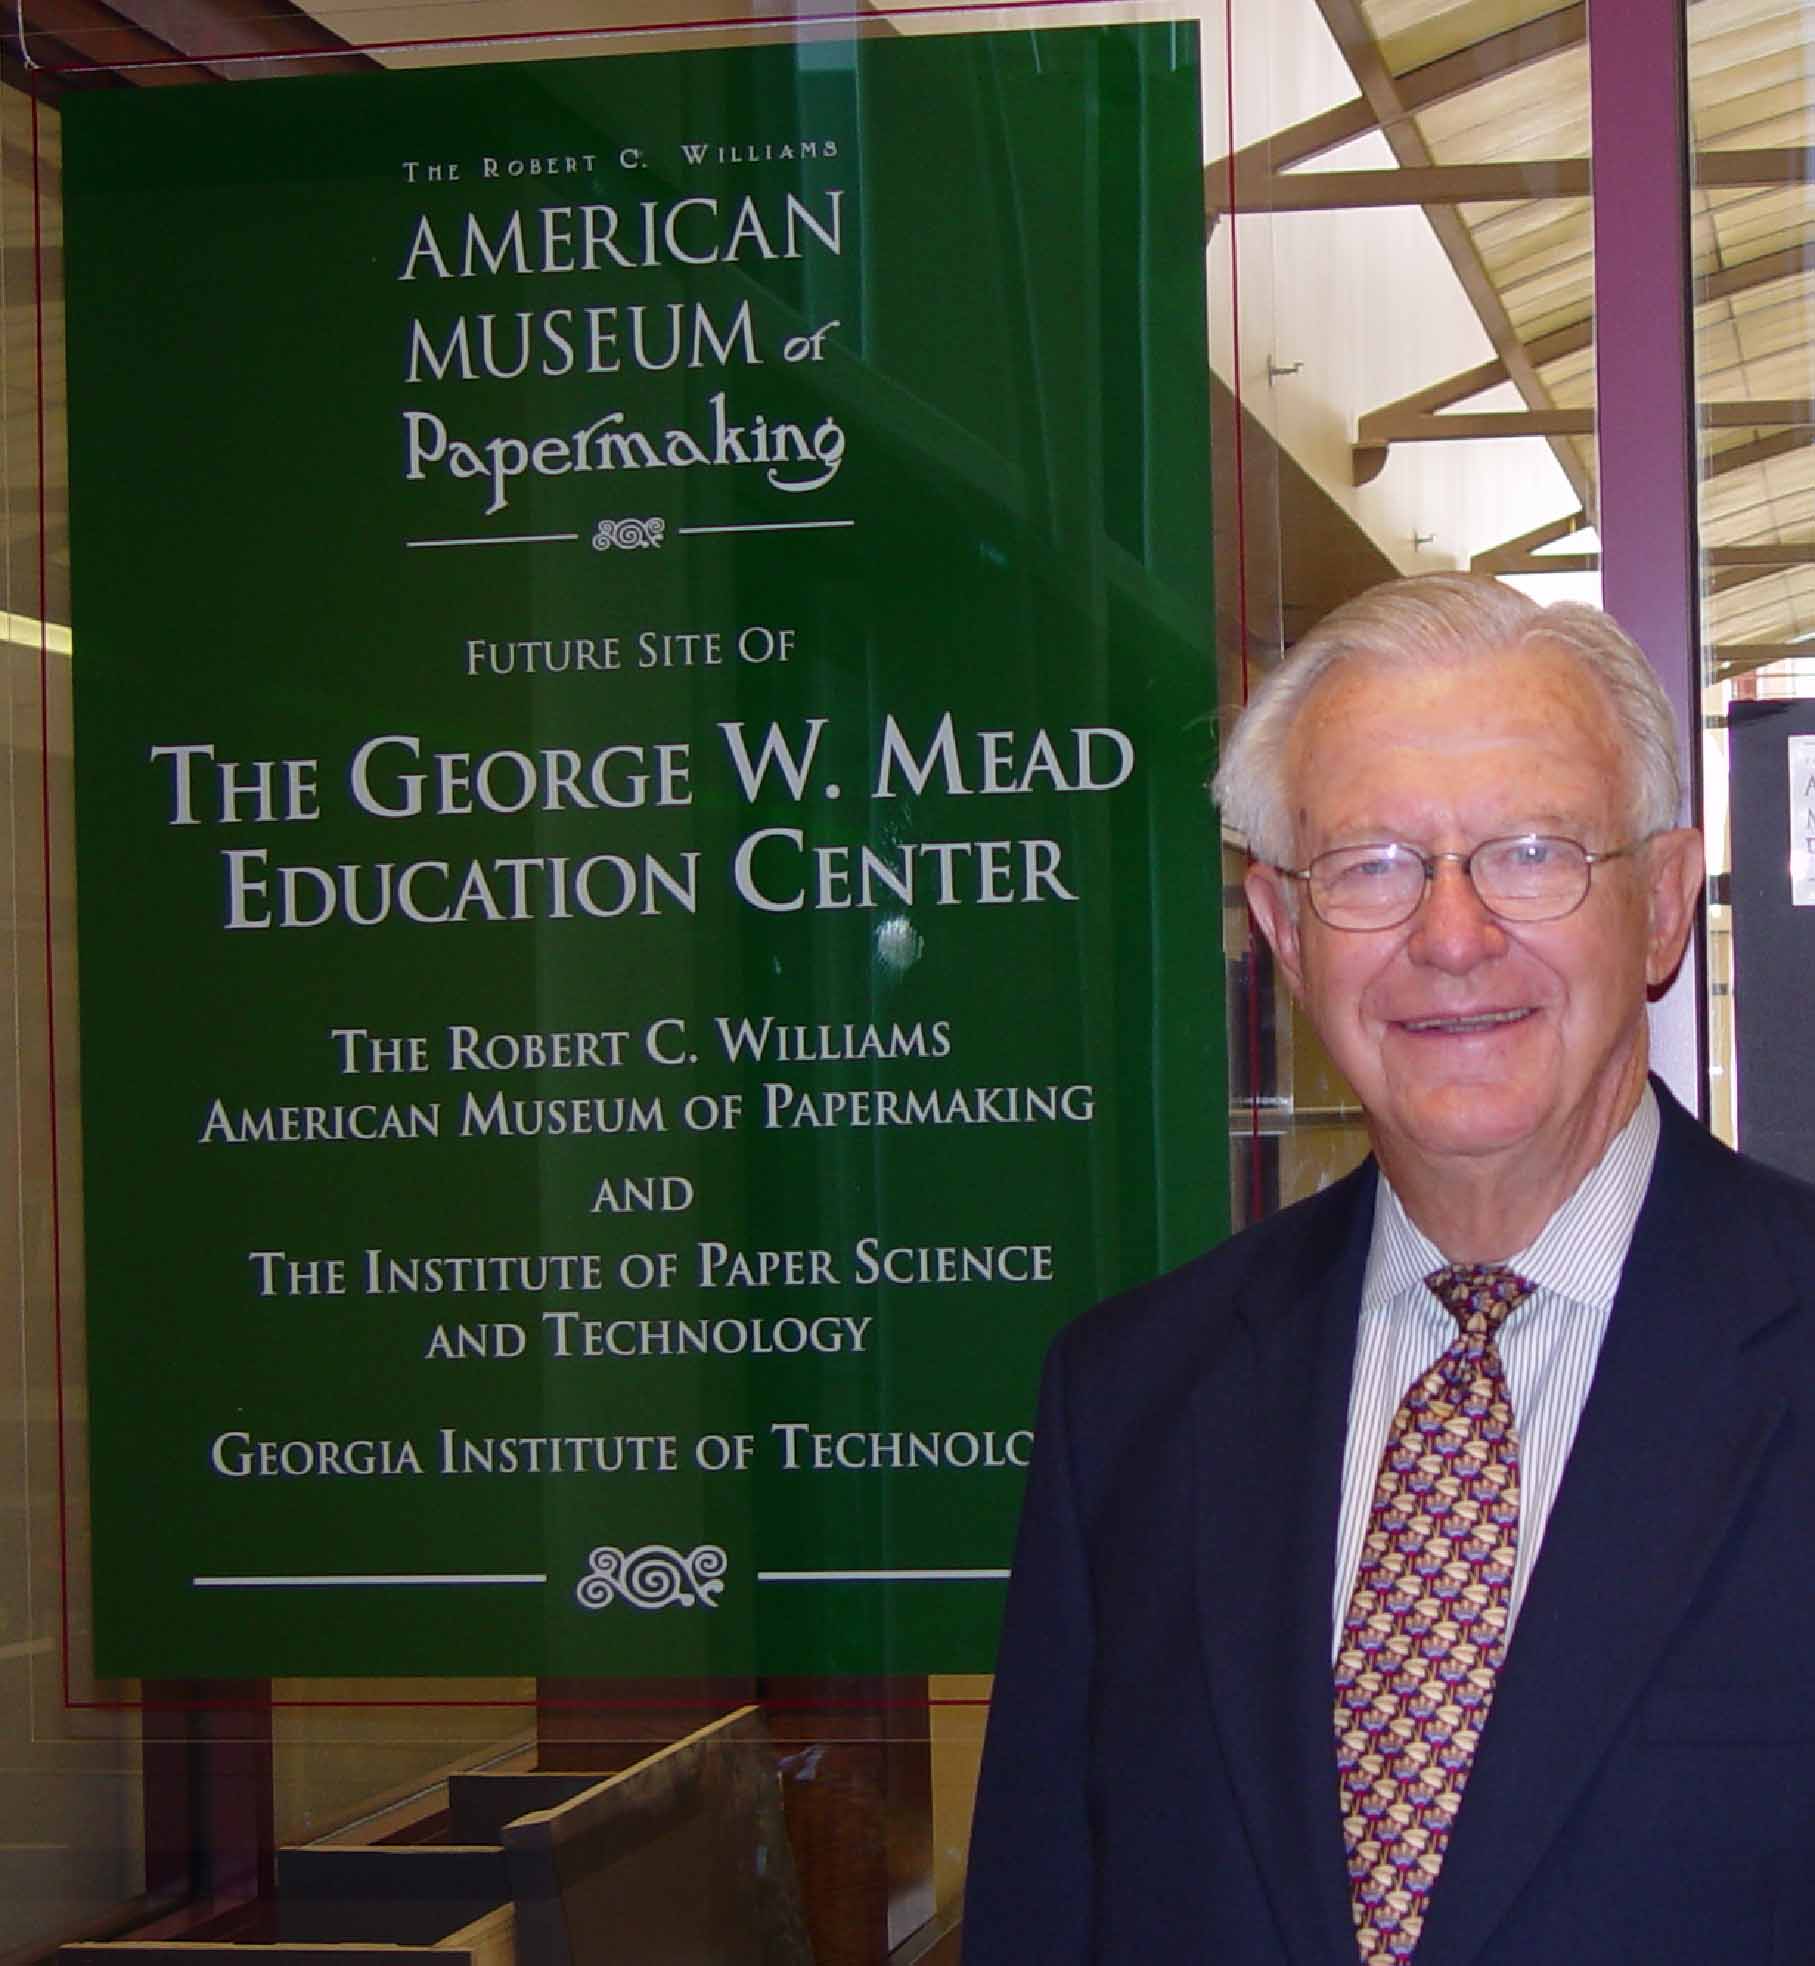 George Mead visiting the Robert C. Williams Museum of Papermaking, 2004